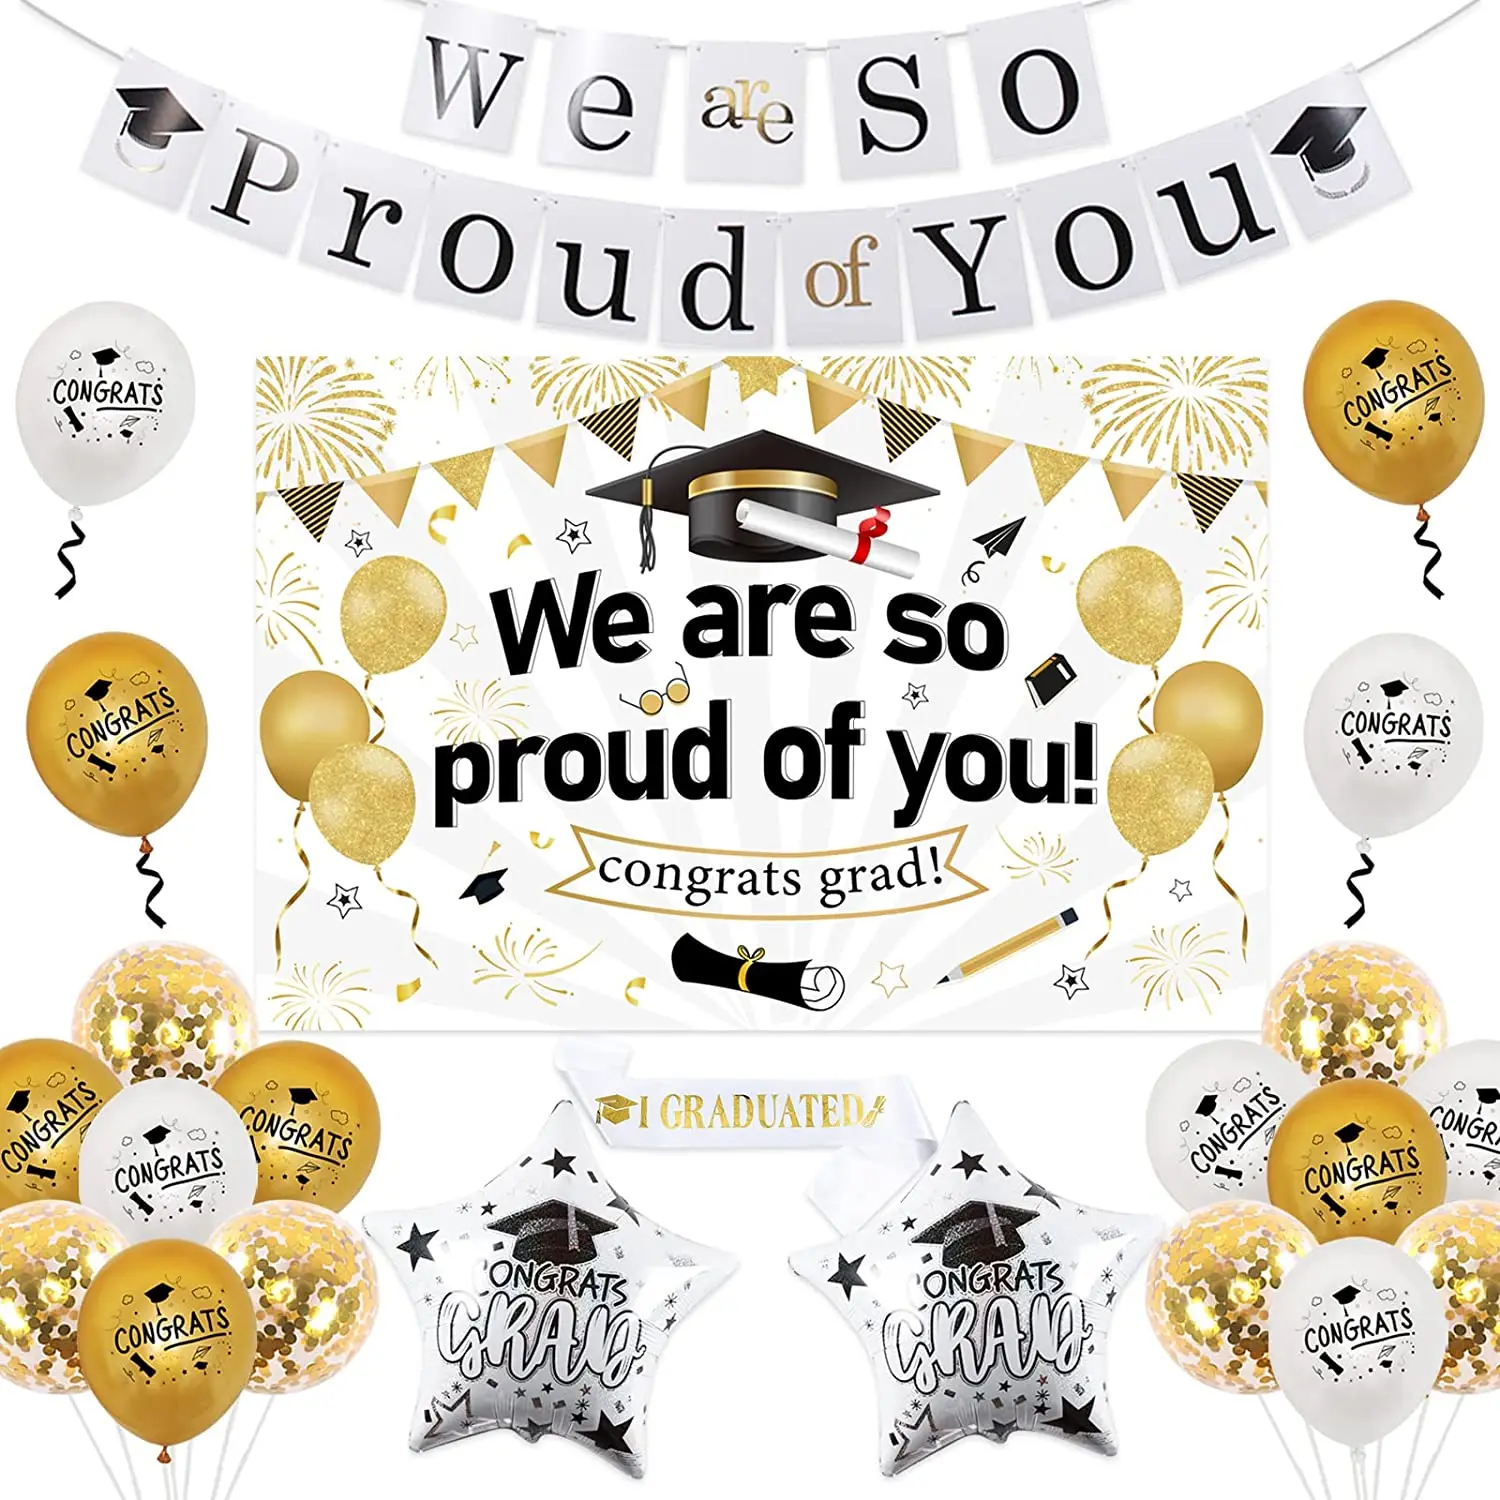 

JOYMEMO Graduation Party Decorations 2023, We Are So Proud of You Banner Photo Booth Backdrop, Congrats Grad Balloons White Gold